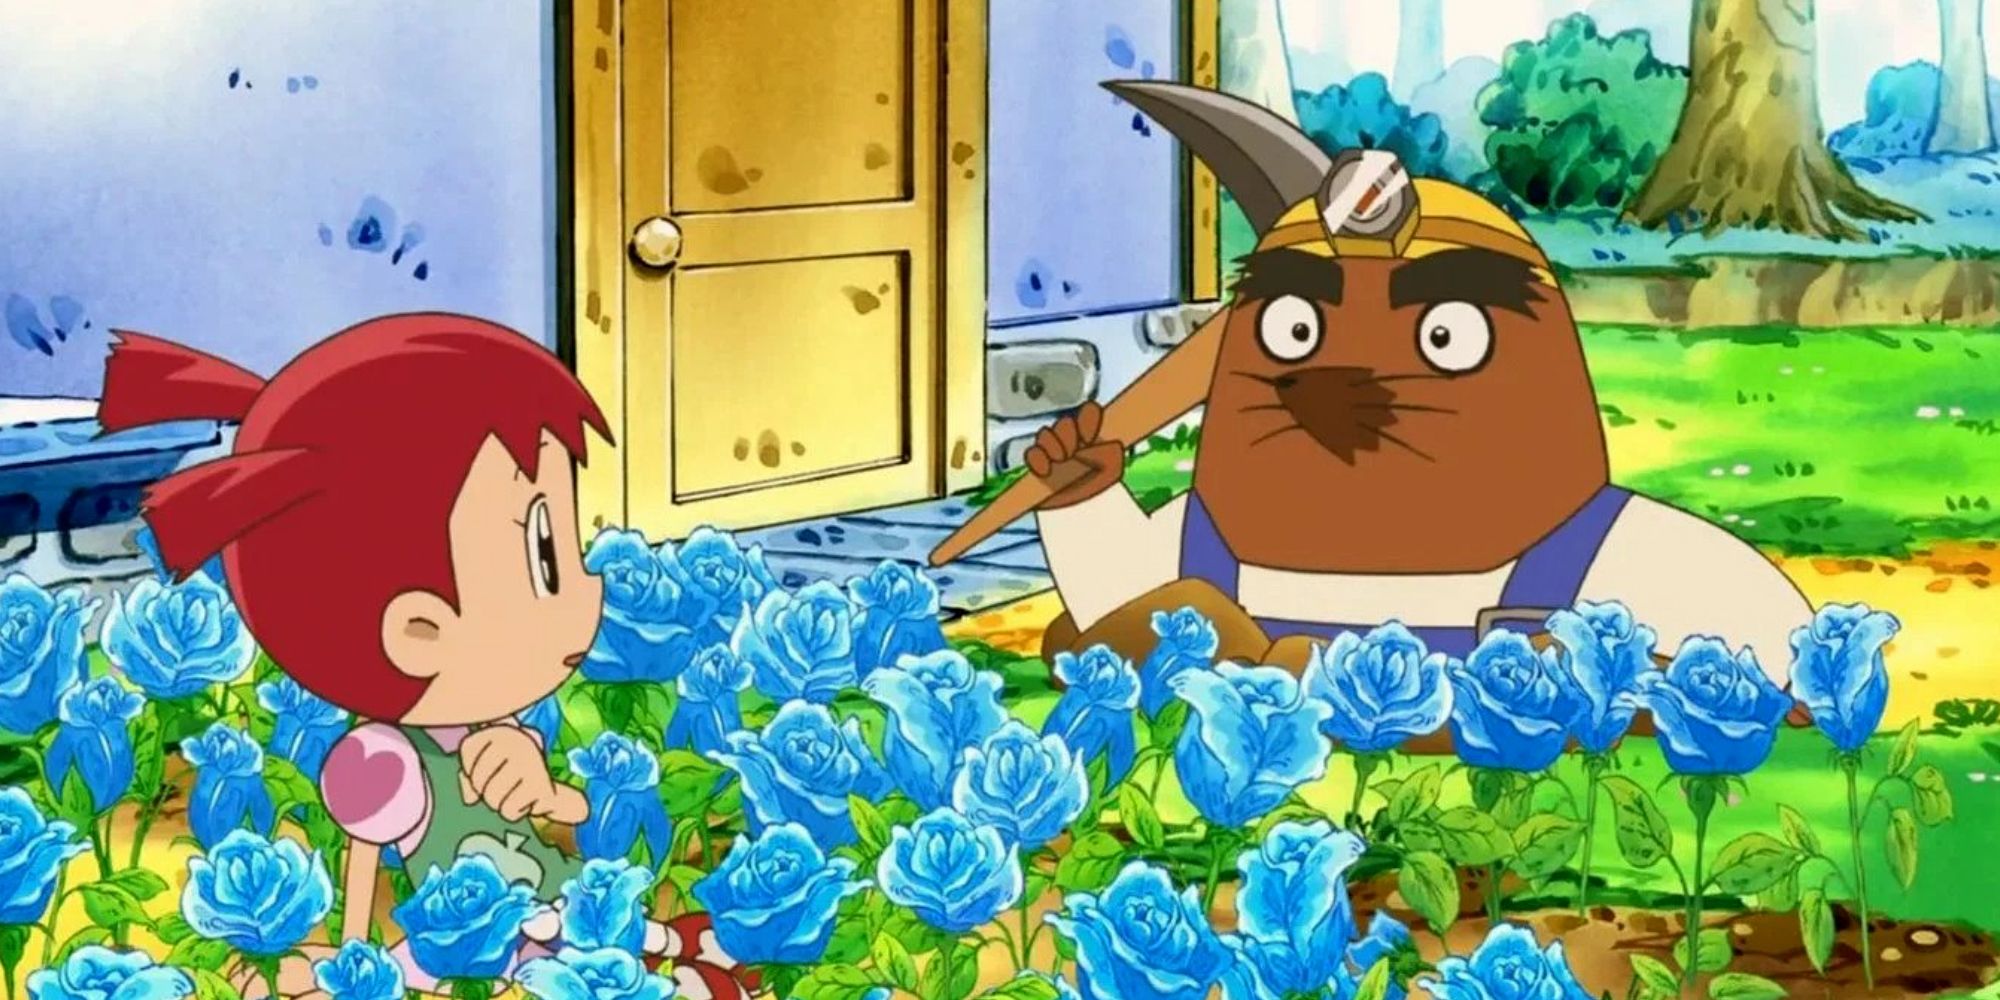 Image Depicting a Still From The Animal Crossig Movie With Rosetti Berating the main character